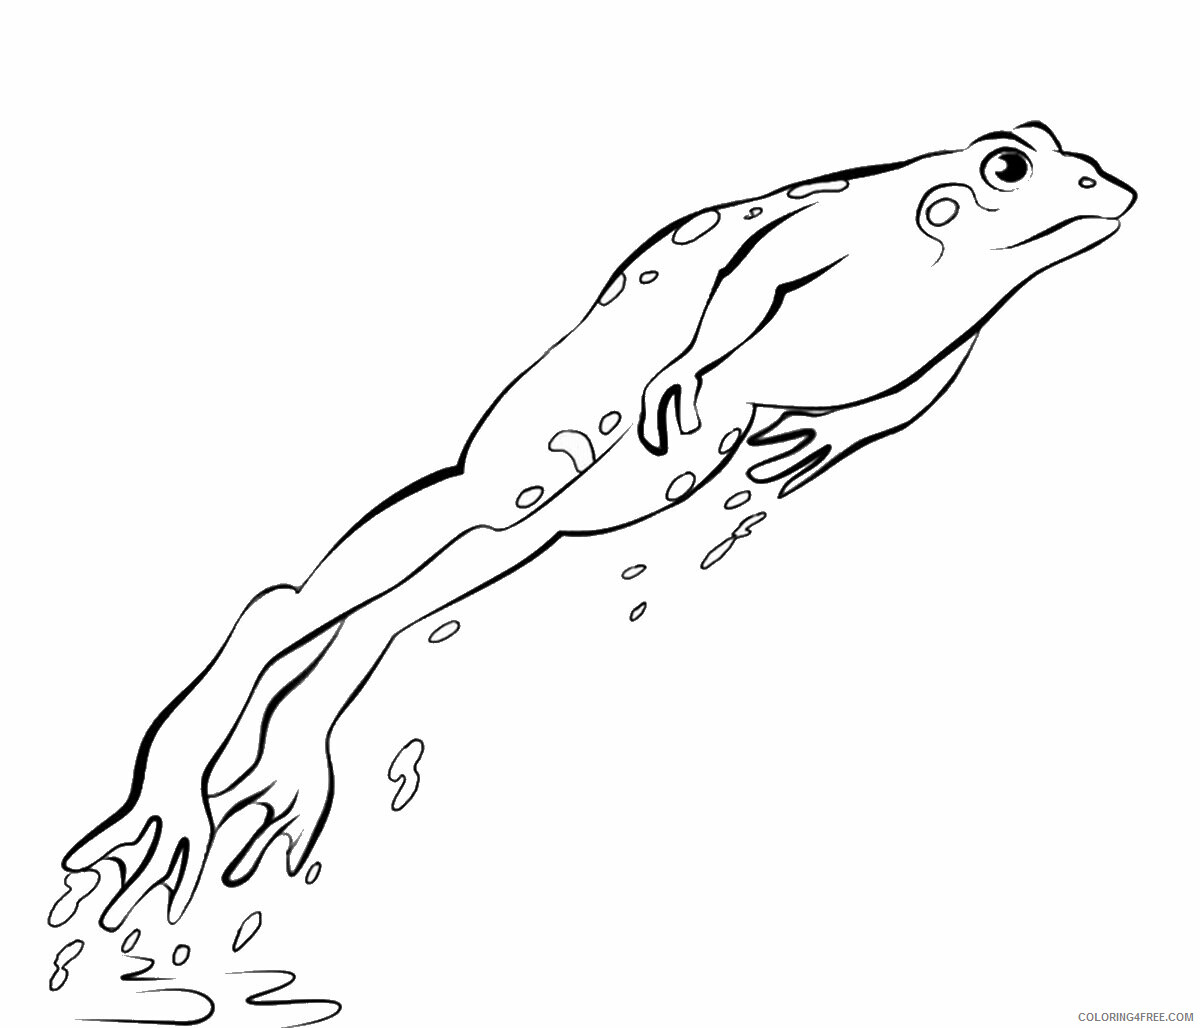 Frog Coloring Pages Animal Printable Sheets frog_cl_09 2021 2284 Coloring4free